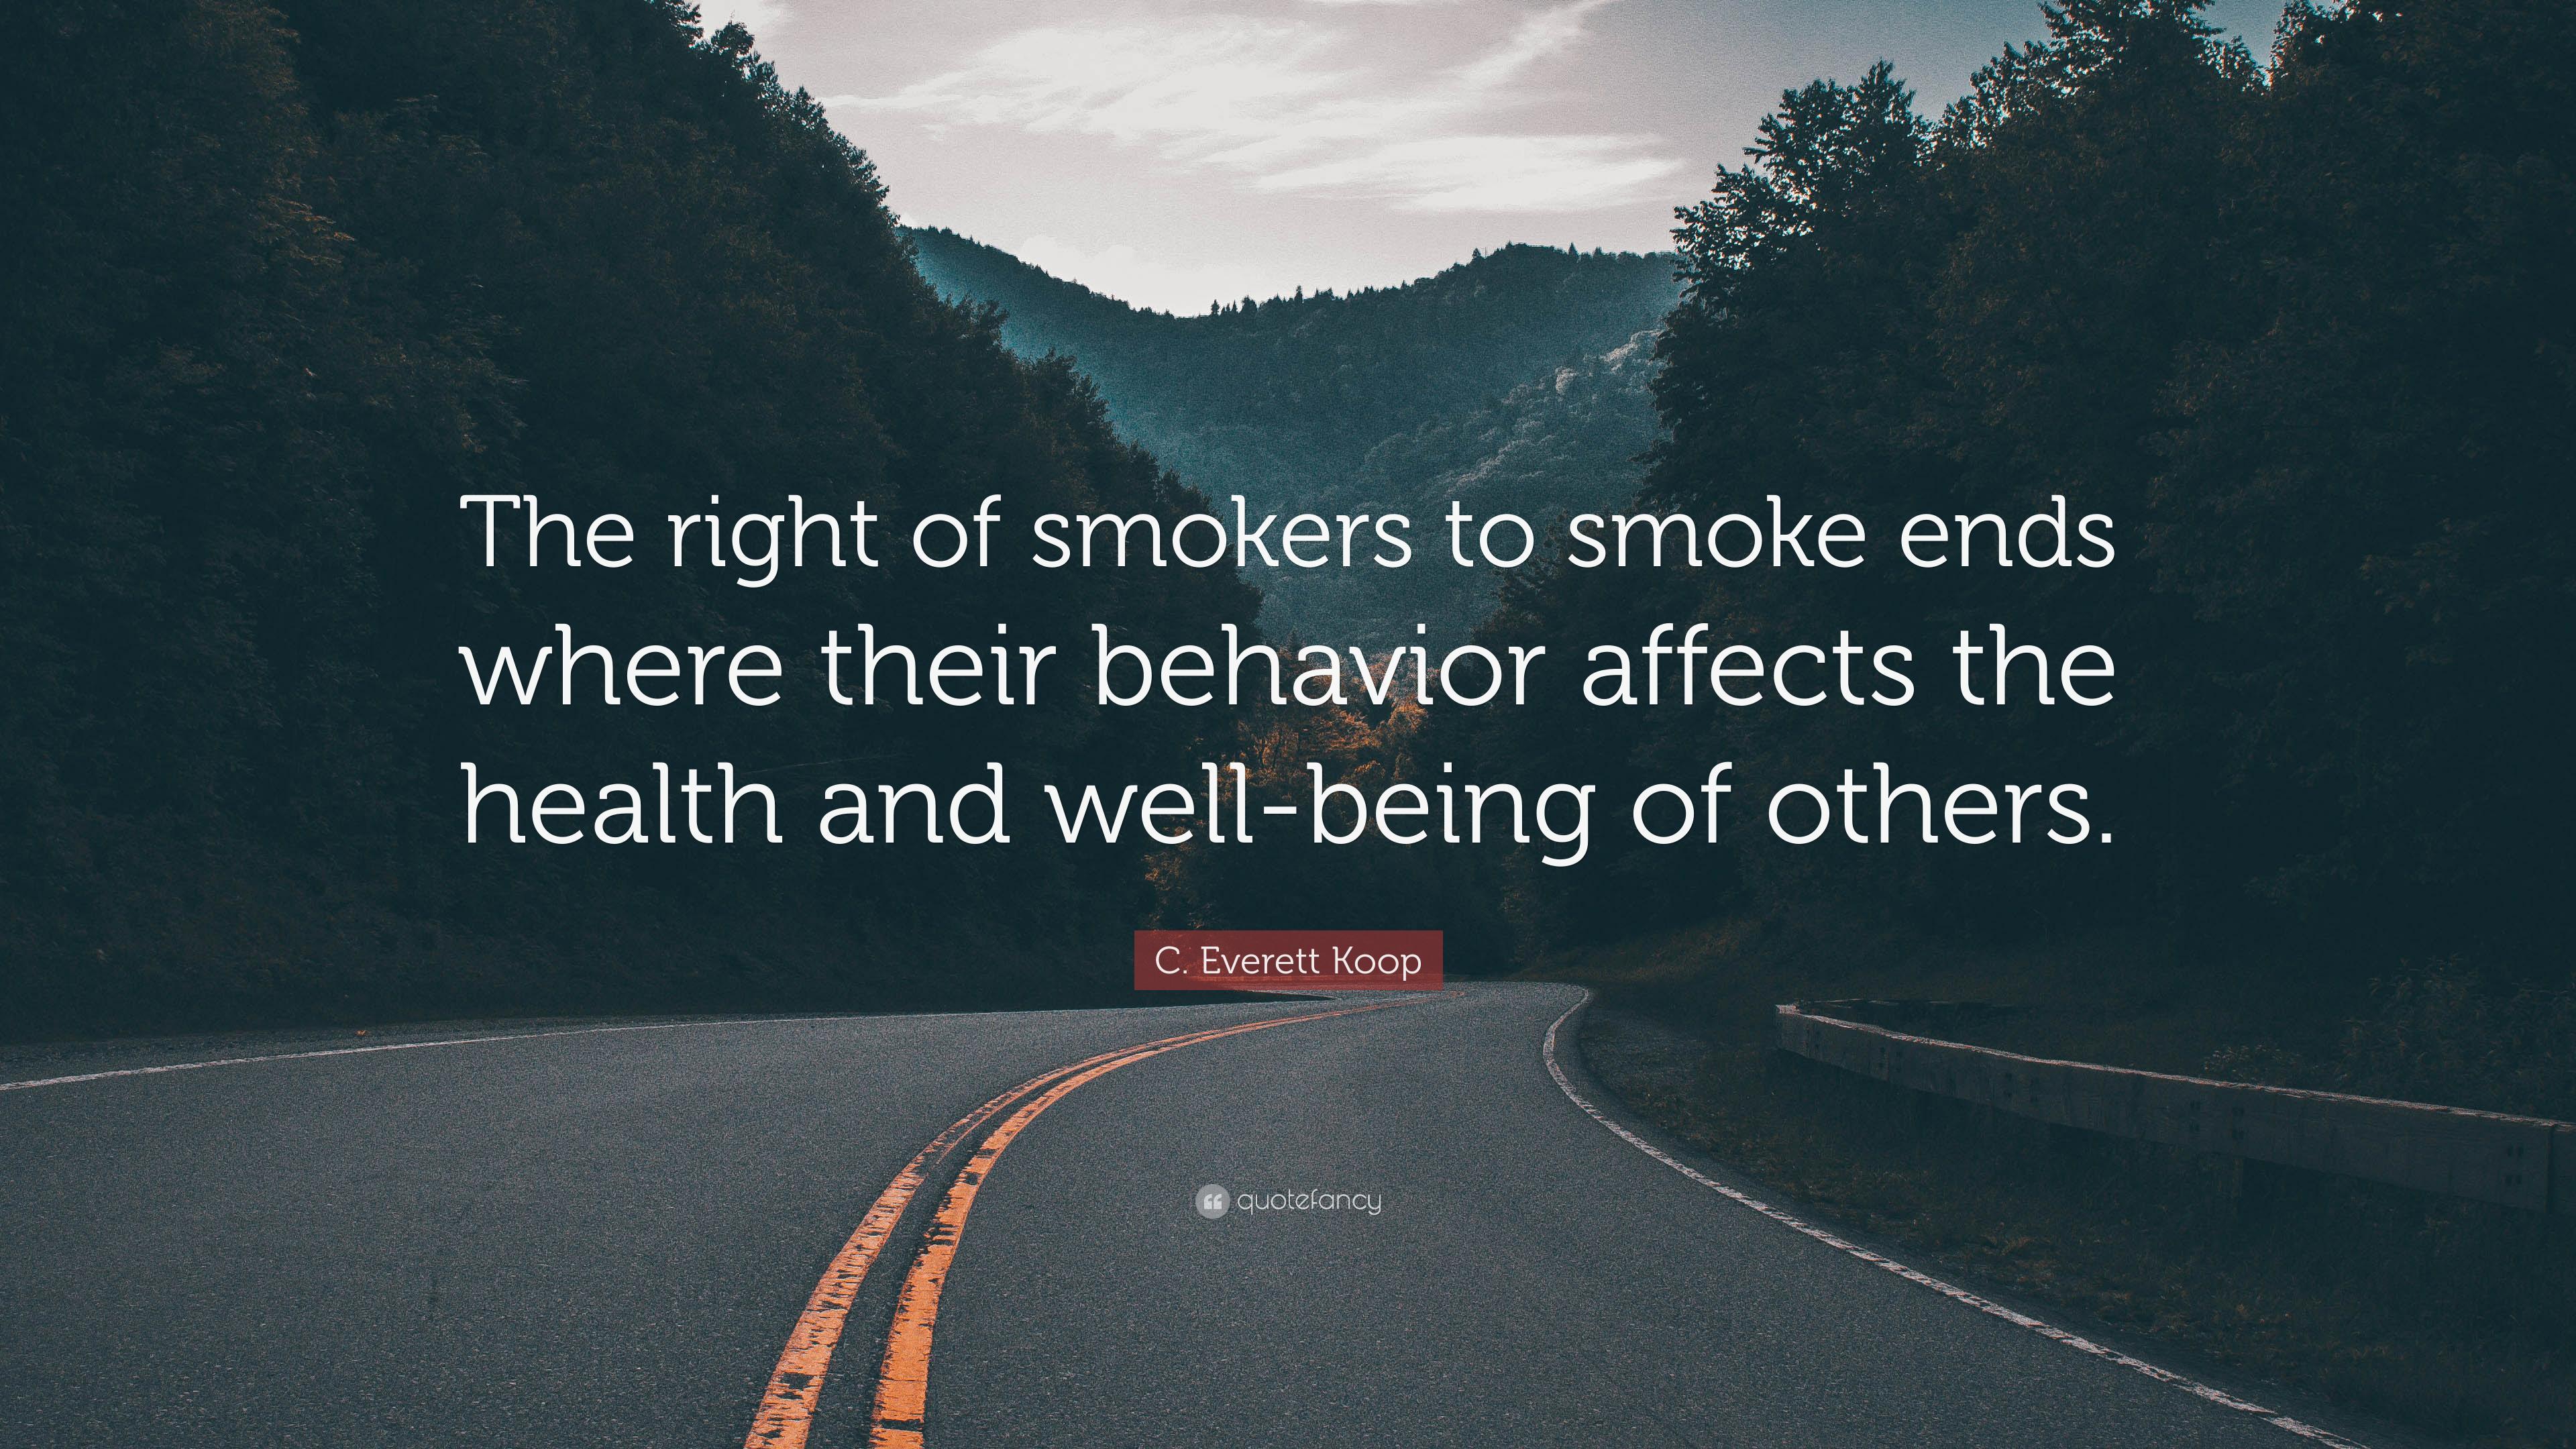 C. Everett Koop Quote: "The right of smokers to smoke ends where.